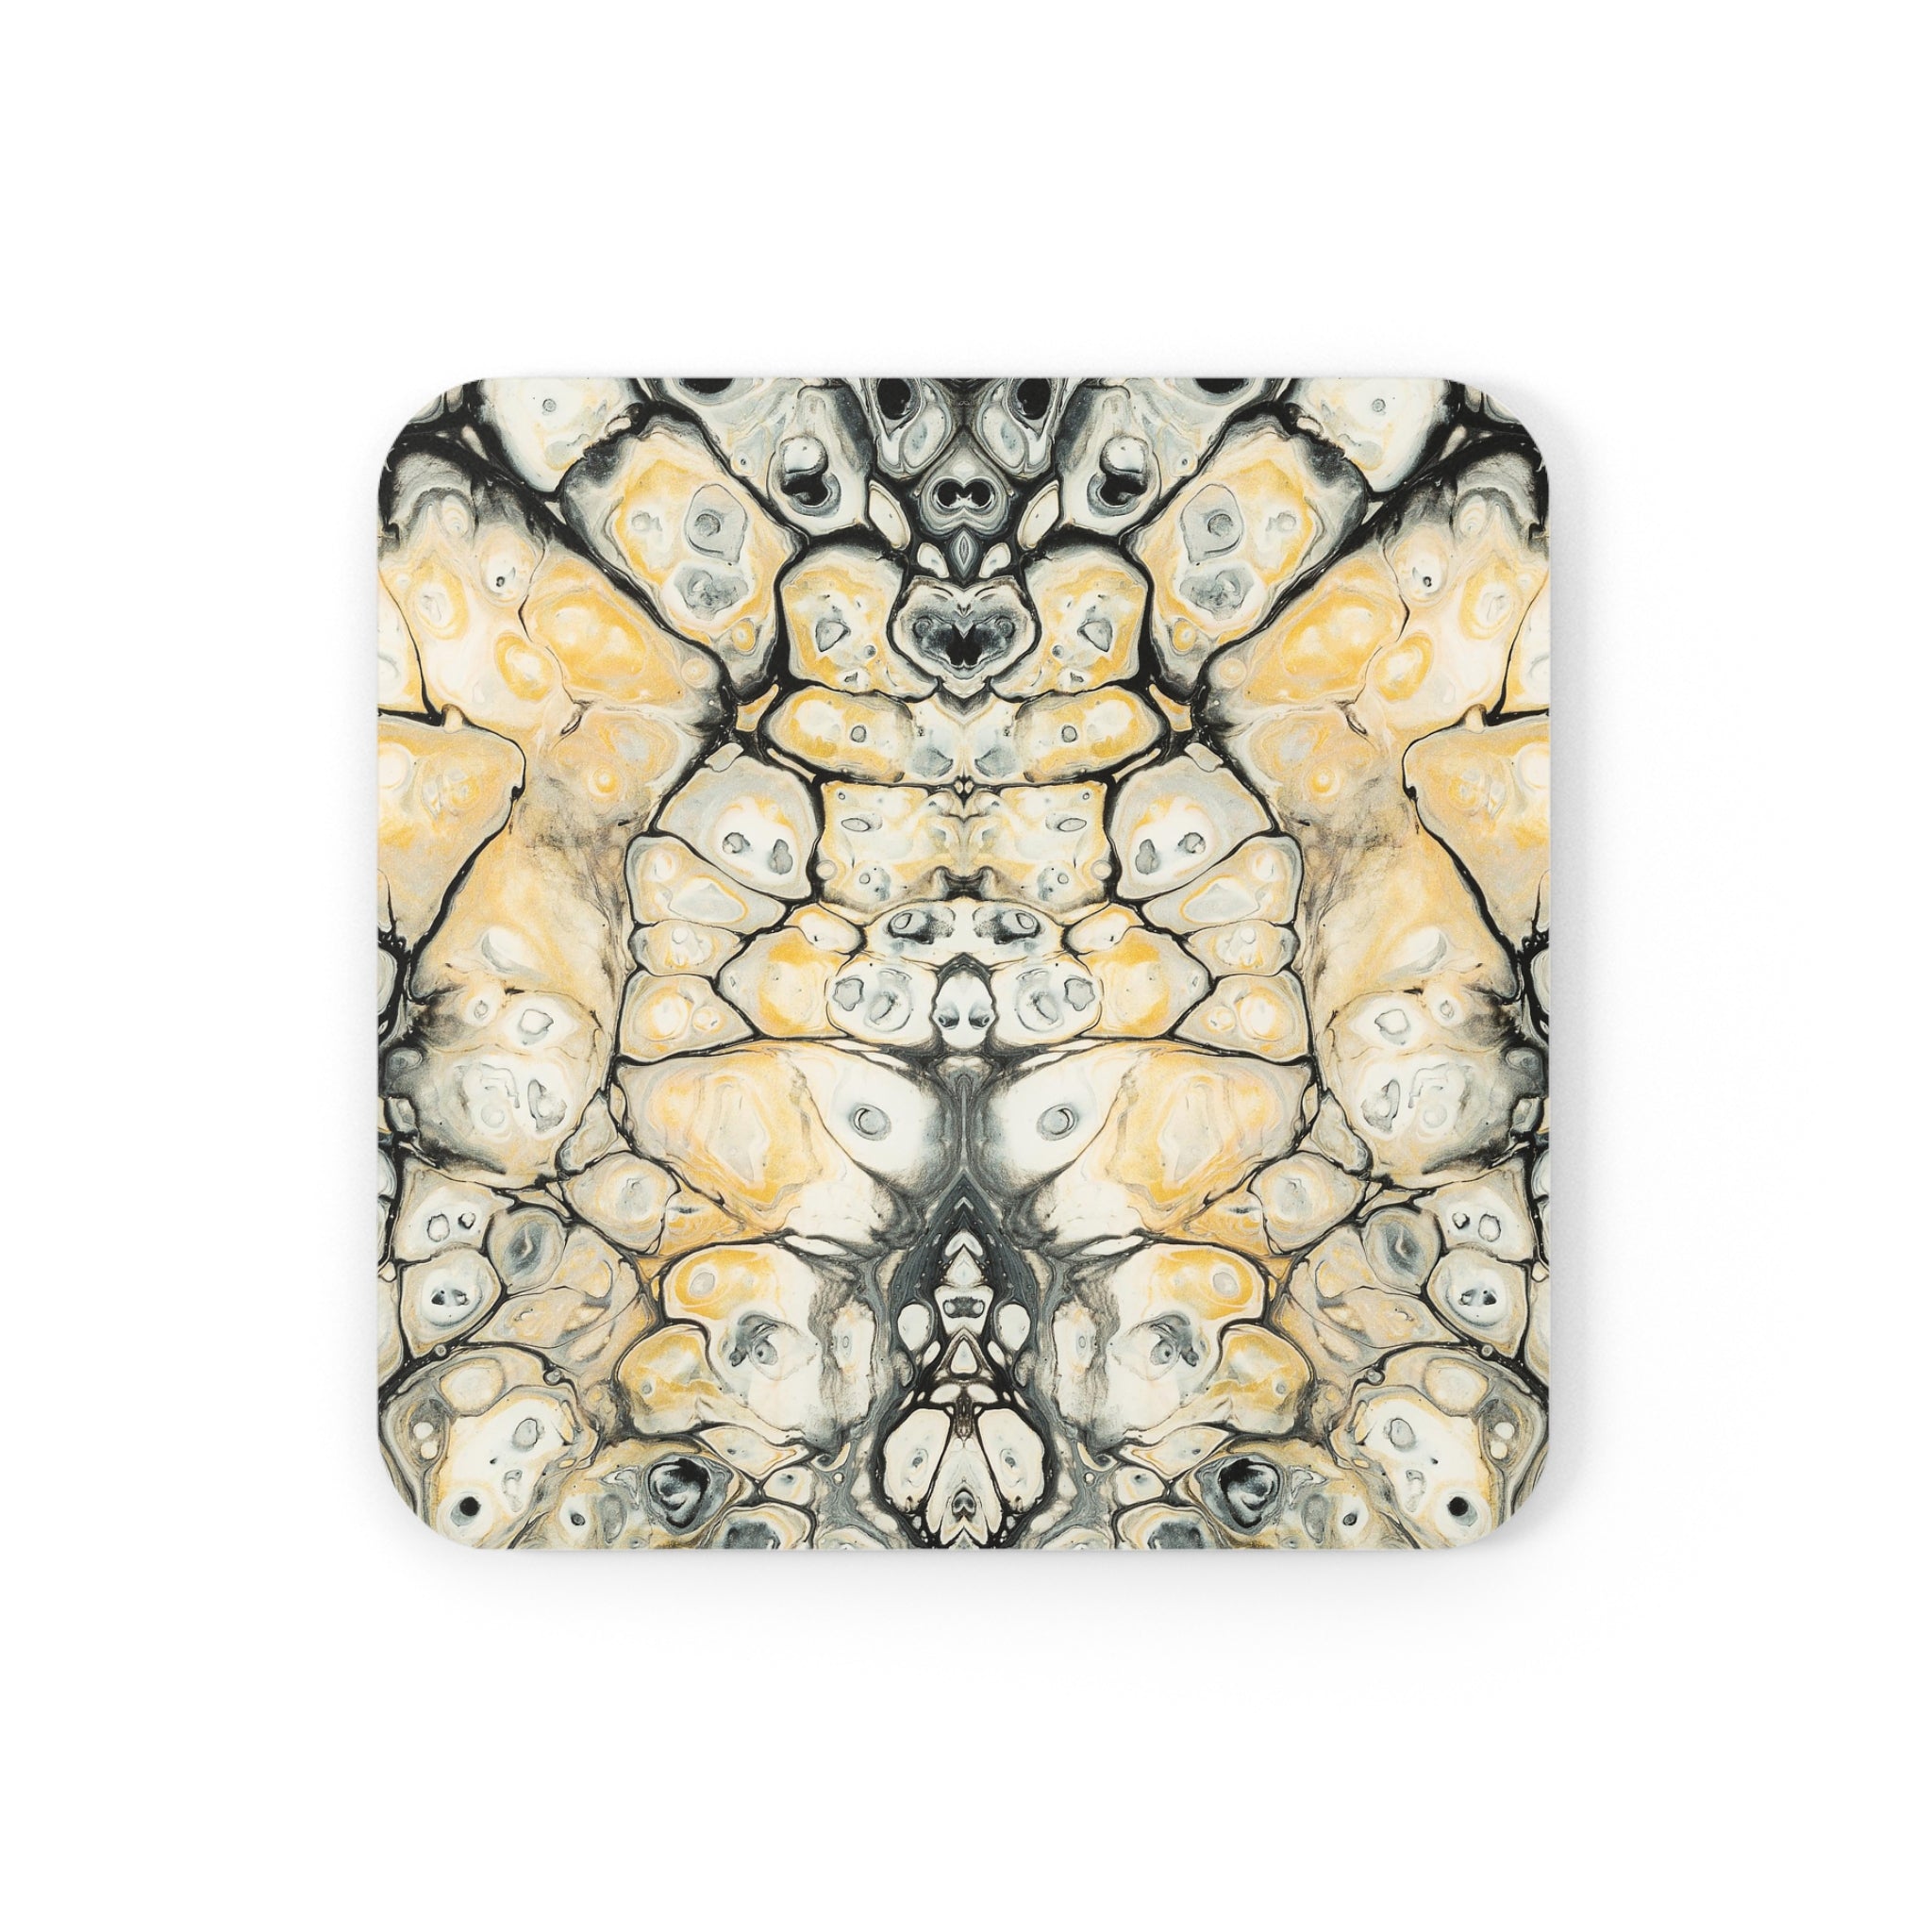 Cameron Creations - Moon Of Panos - Stylish Coffee Coaster - Square Front